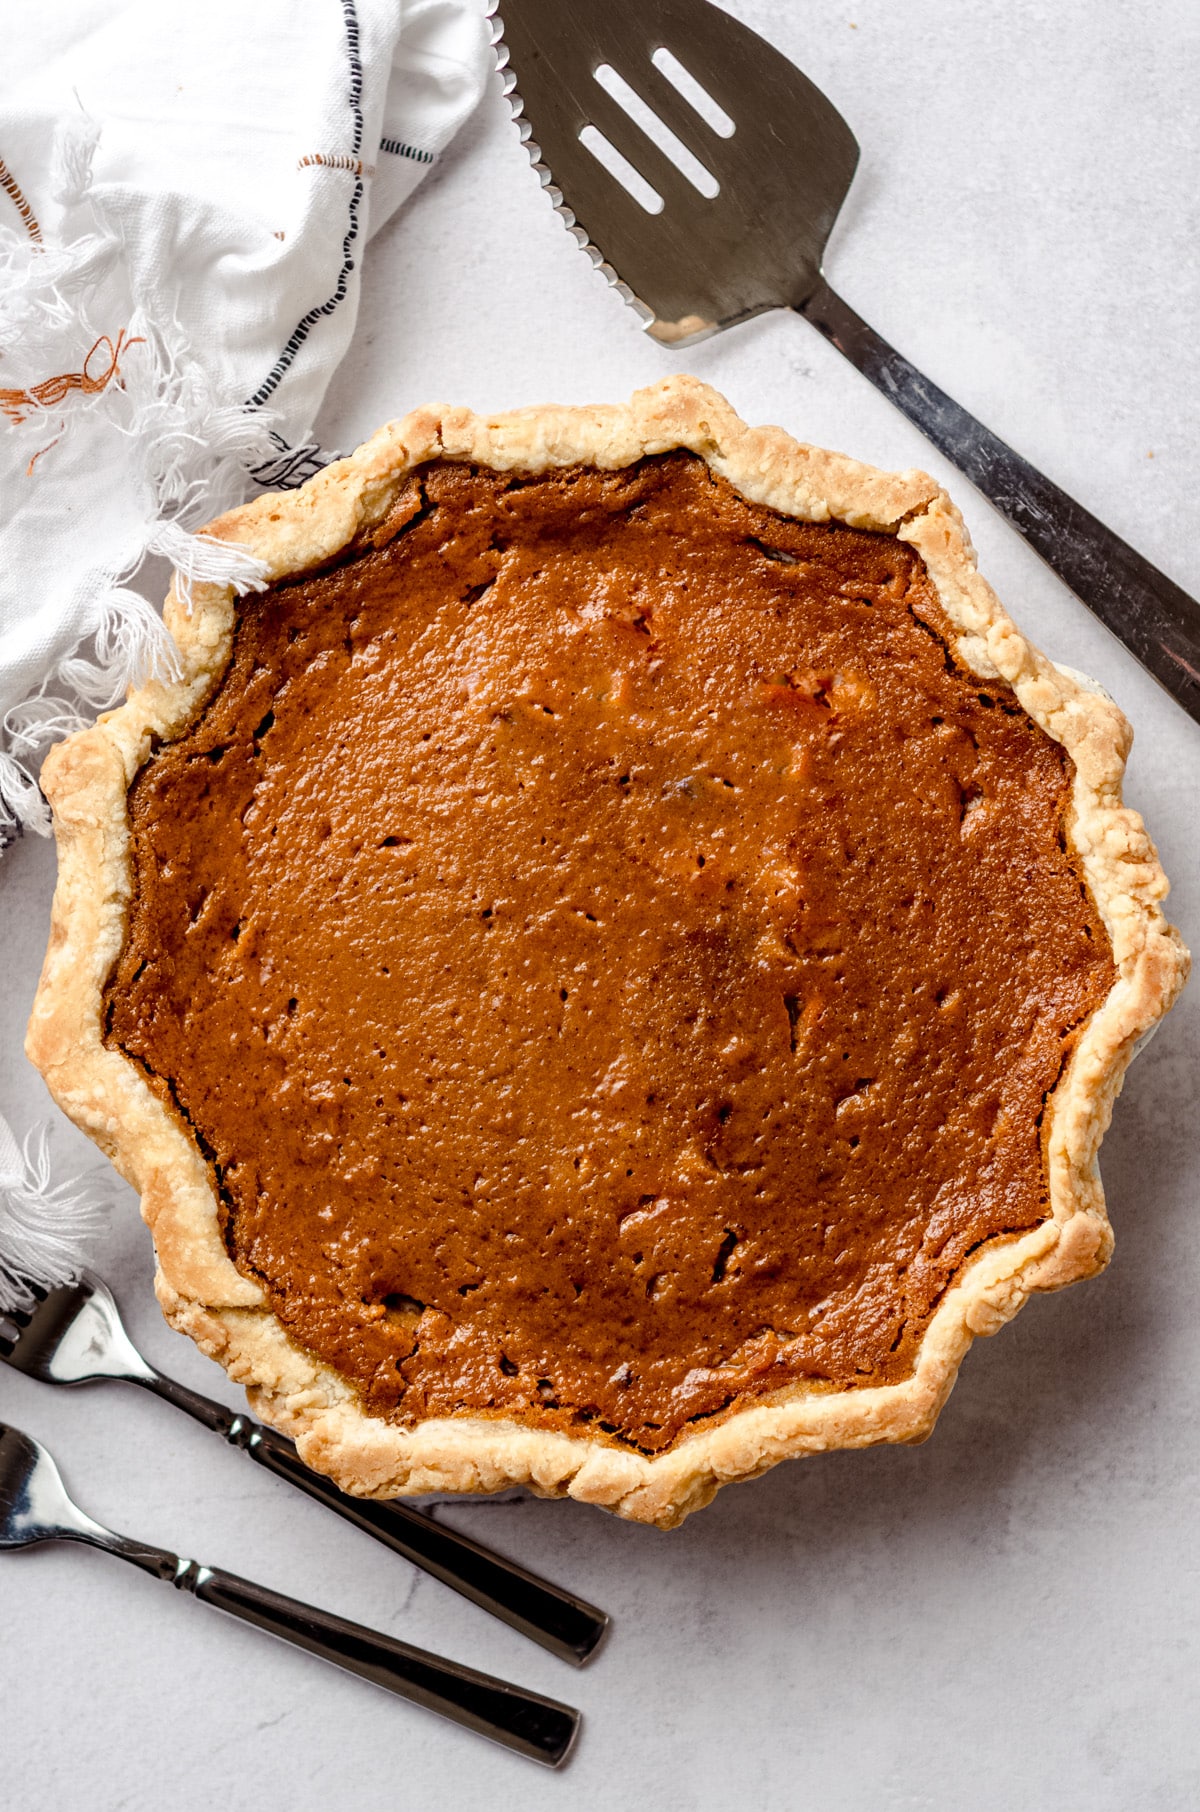 A sweet potato pie on a counter, with a serving spatula on the side.